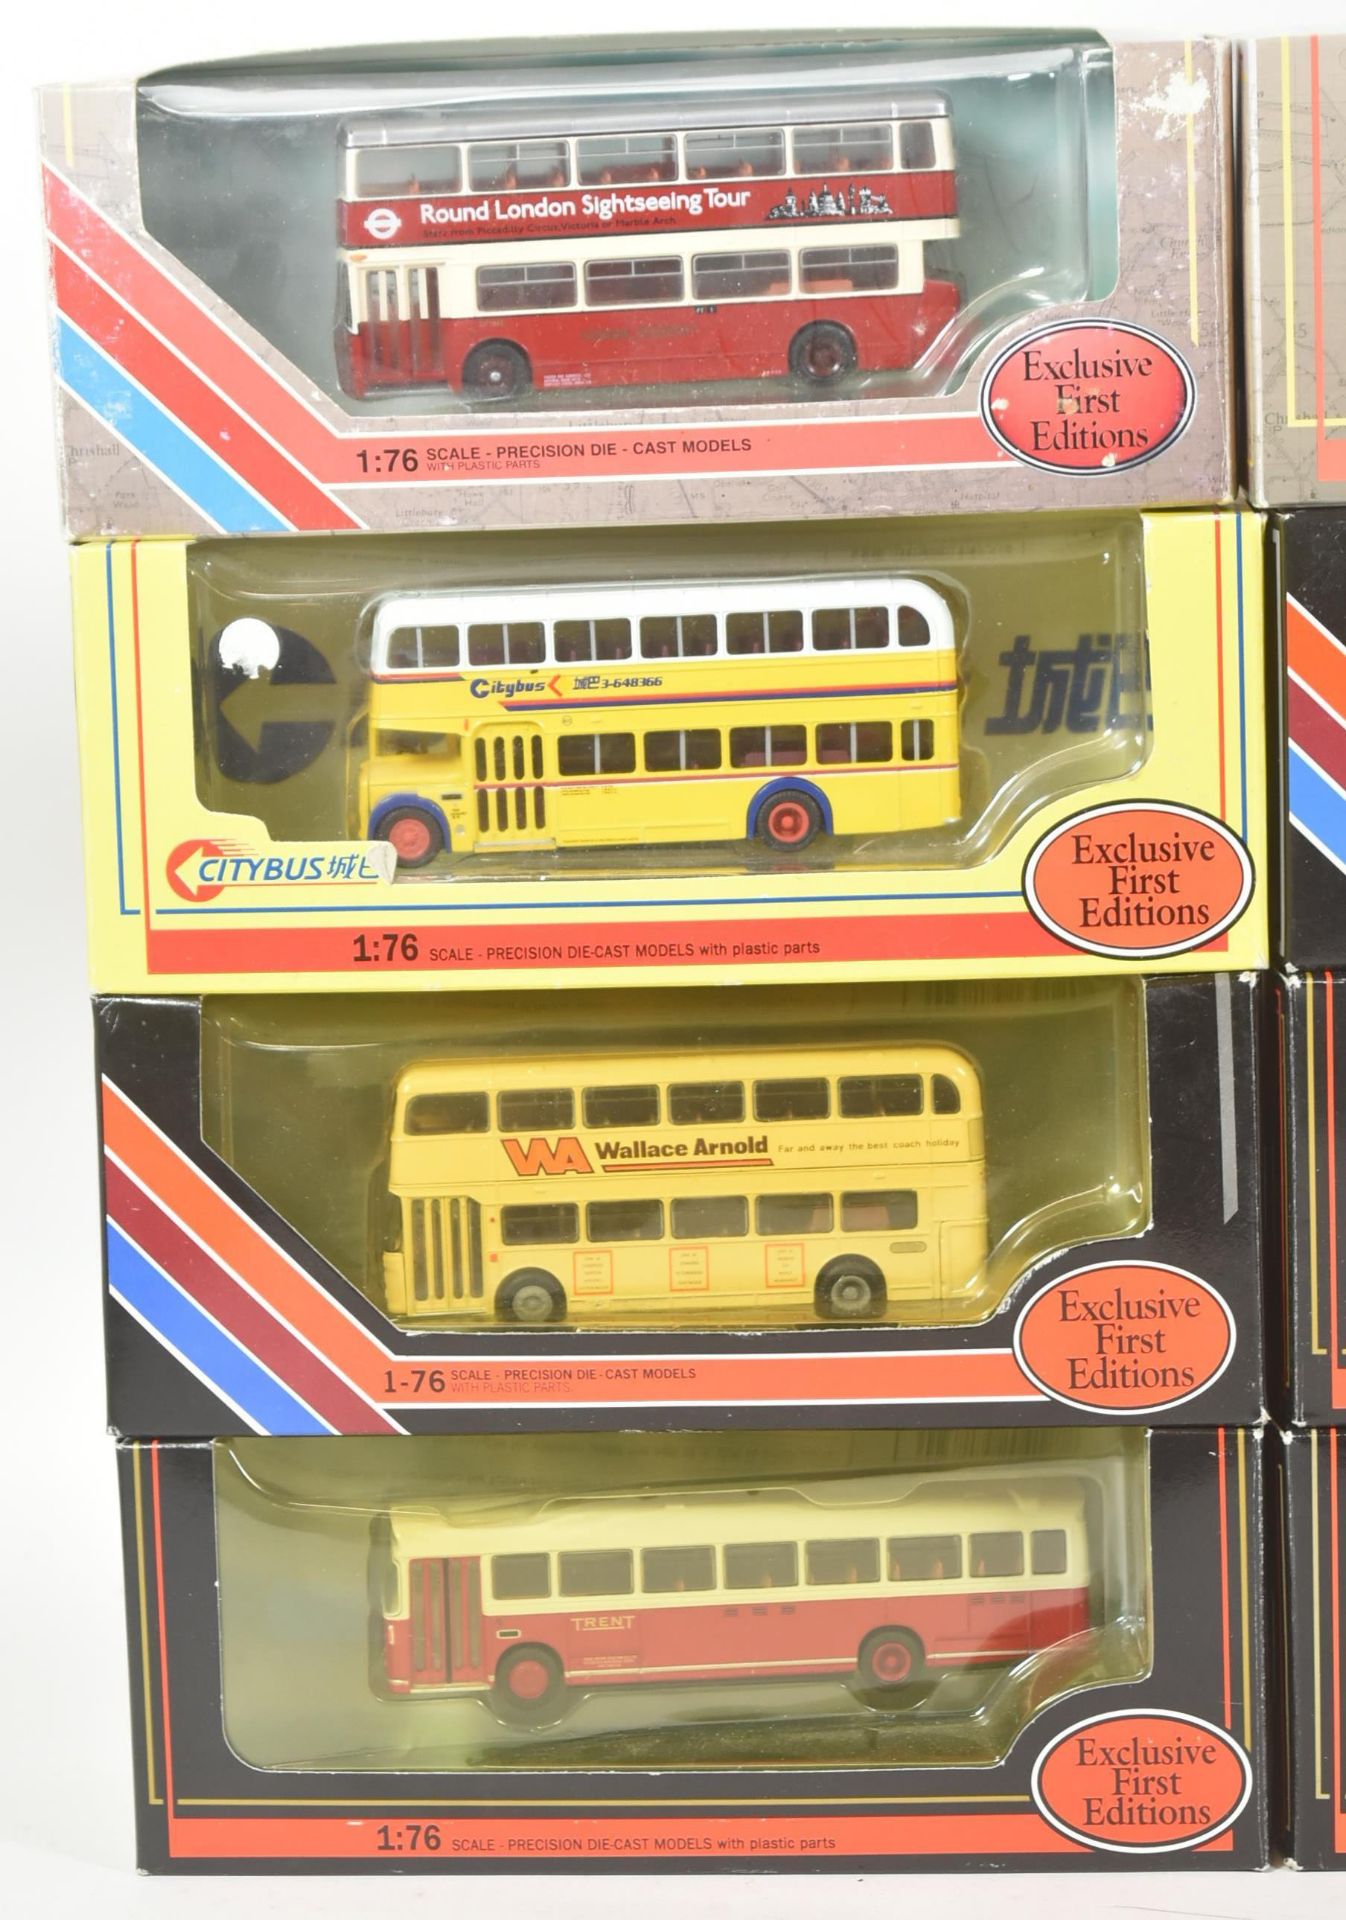 DIECAST - EFE EXCLUSIVE FIRST EDITIONS DIECAST MODEL BUSES - Image 2 of 5